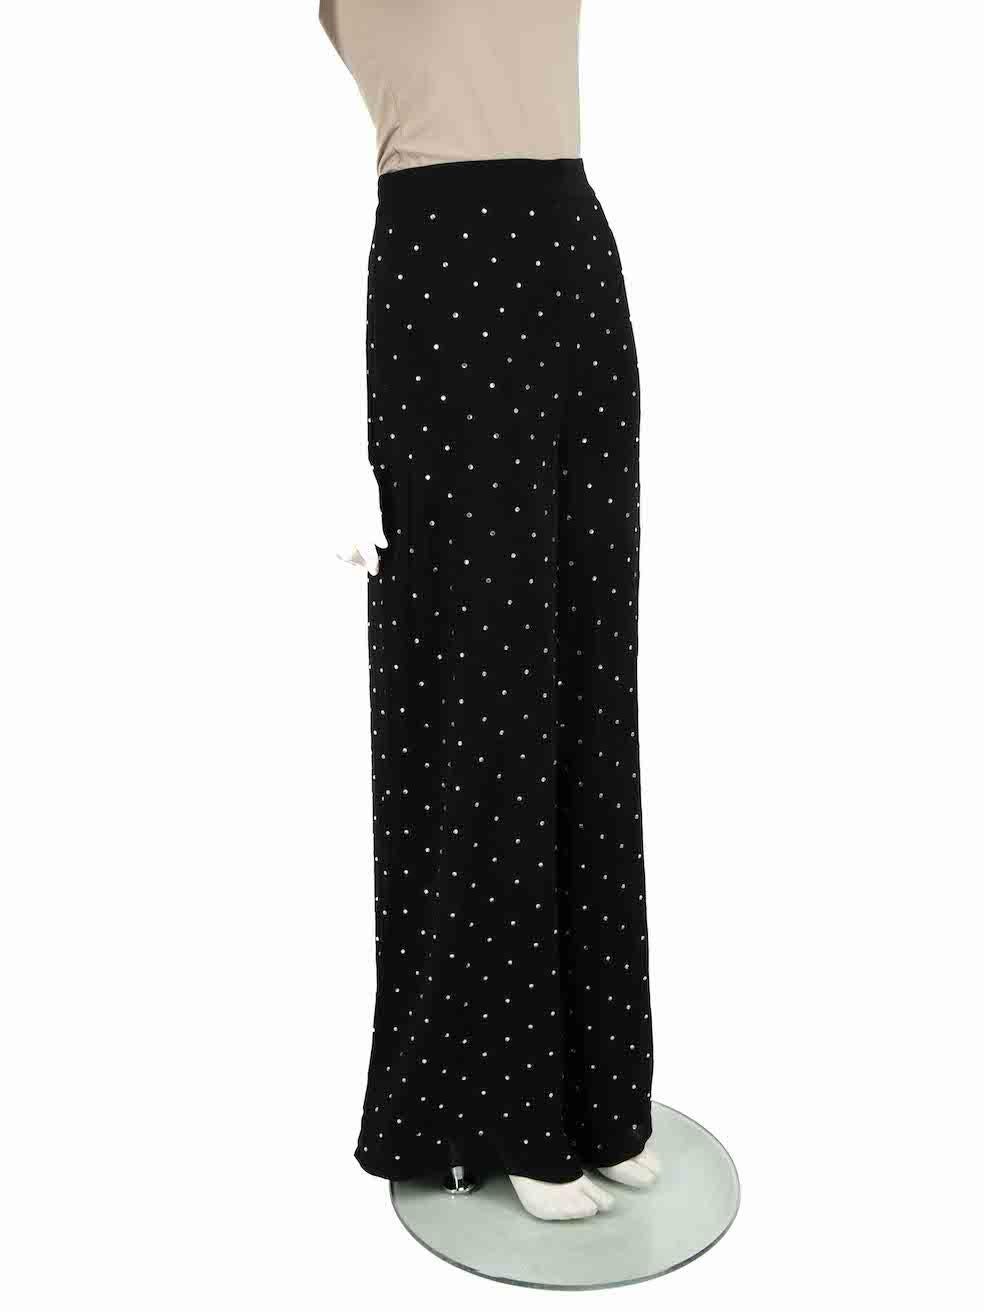 CONDITION is Very good. Hardly any visible wear to trousers is evident on this used Temperley London designer resale item.
 
 
 
 Details
 
 
 Tin model
 
 Black
 
 Viscose
 
 Wide leg trousers
 
 High rise
 
 Crystal embellished accent
 
 Side zip